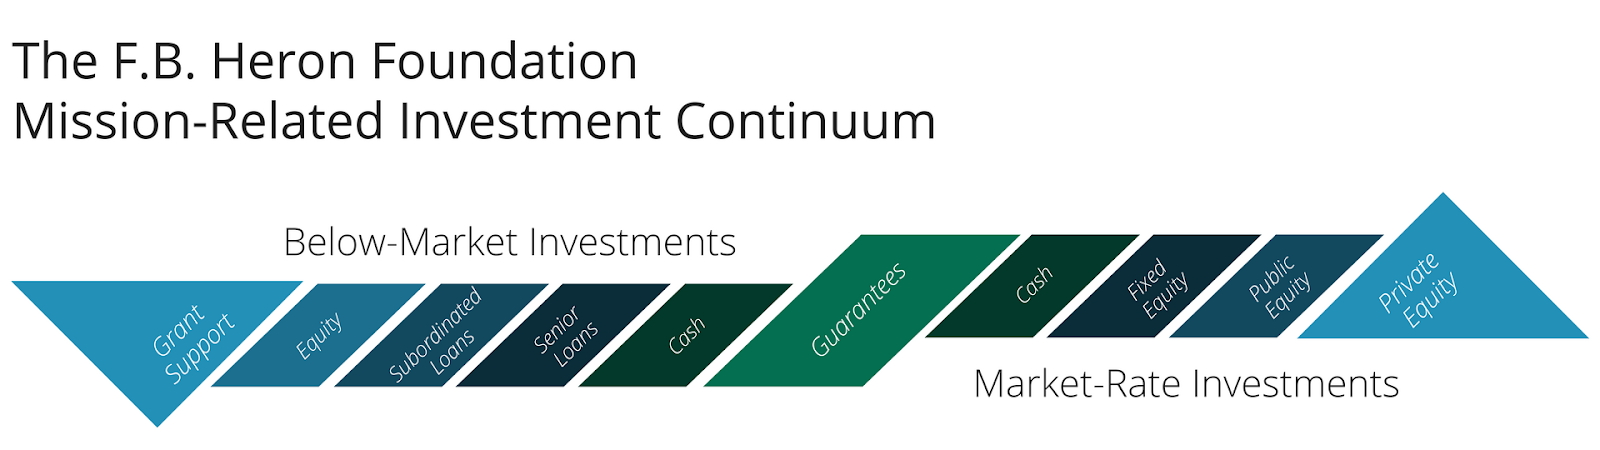 The Mission-Related Investment Continuum